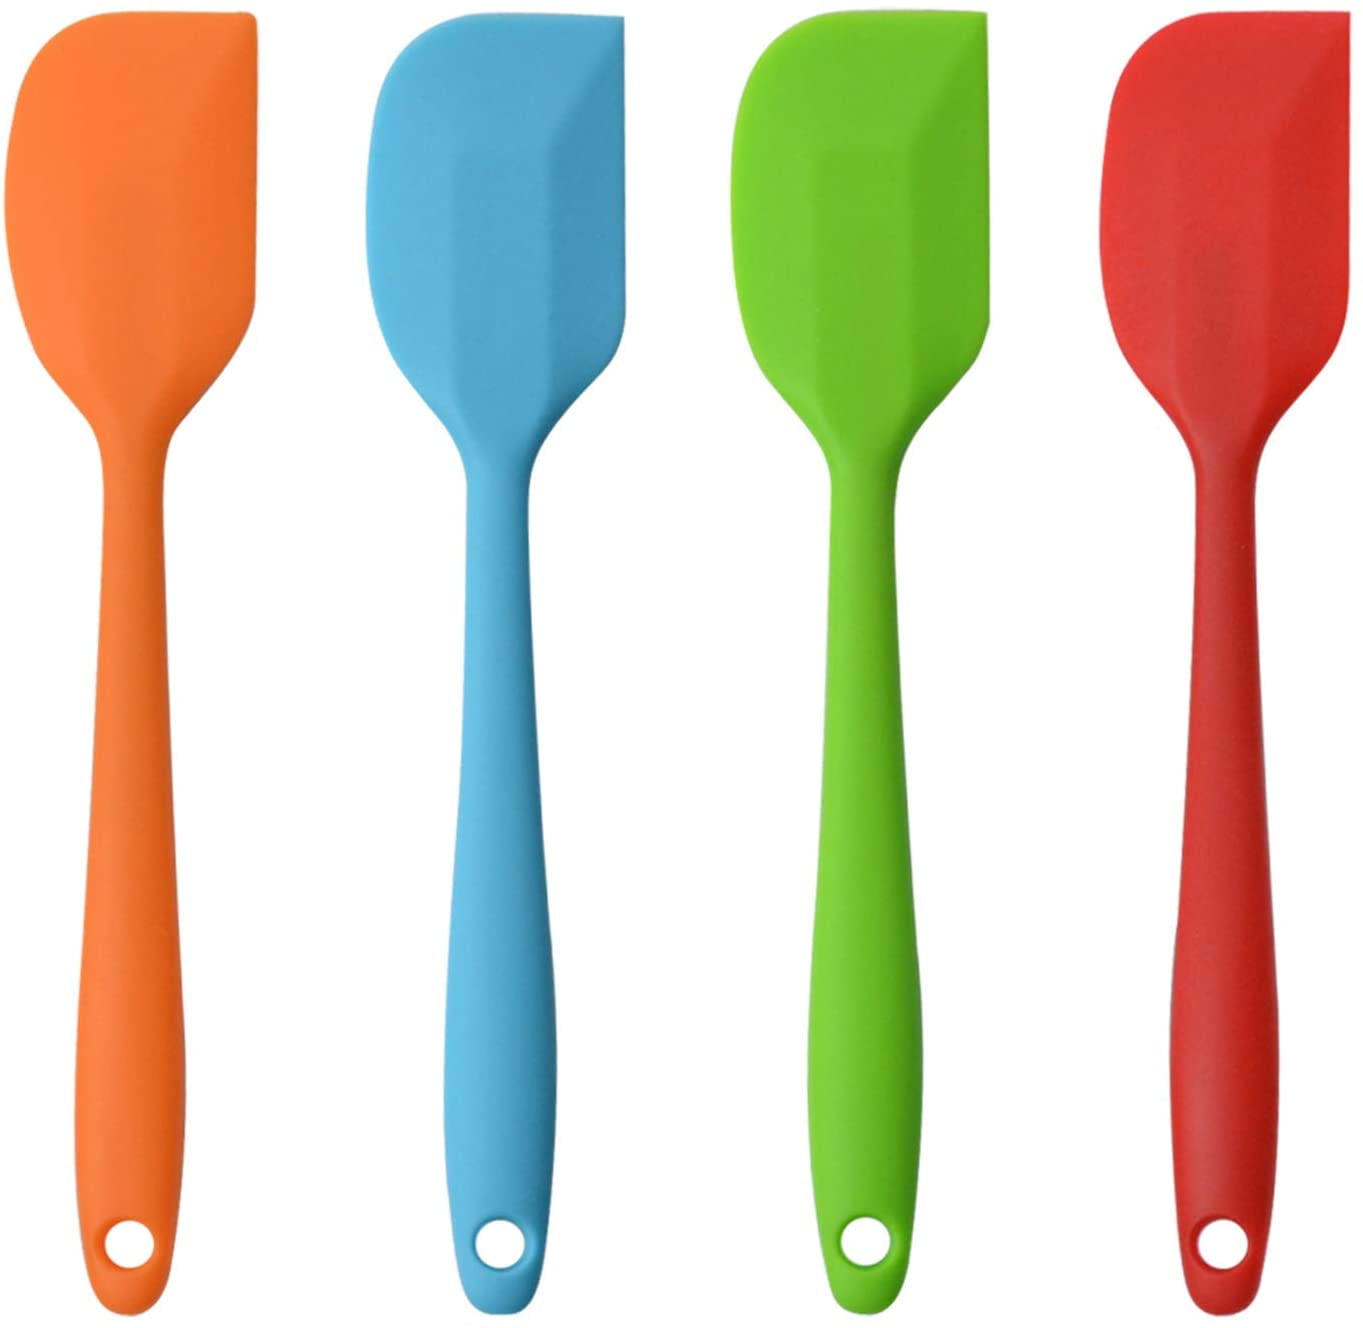 StarPack Basics Silicone Spatula (11.5), High Heat Resistant to 480°F,  Hygienic One Piece Design, Non Stick Rubber Cooking Utensil